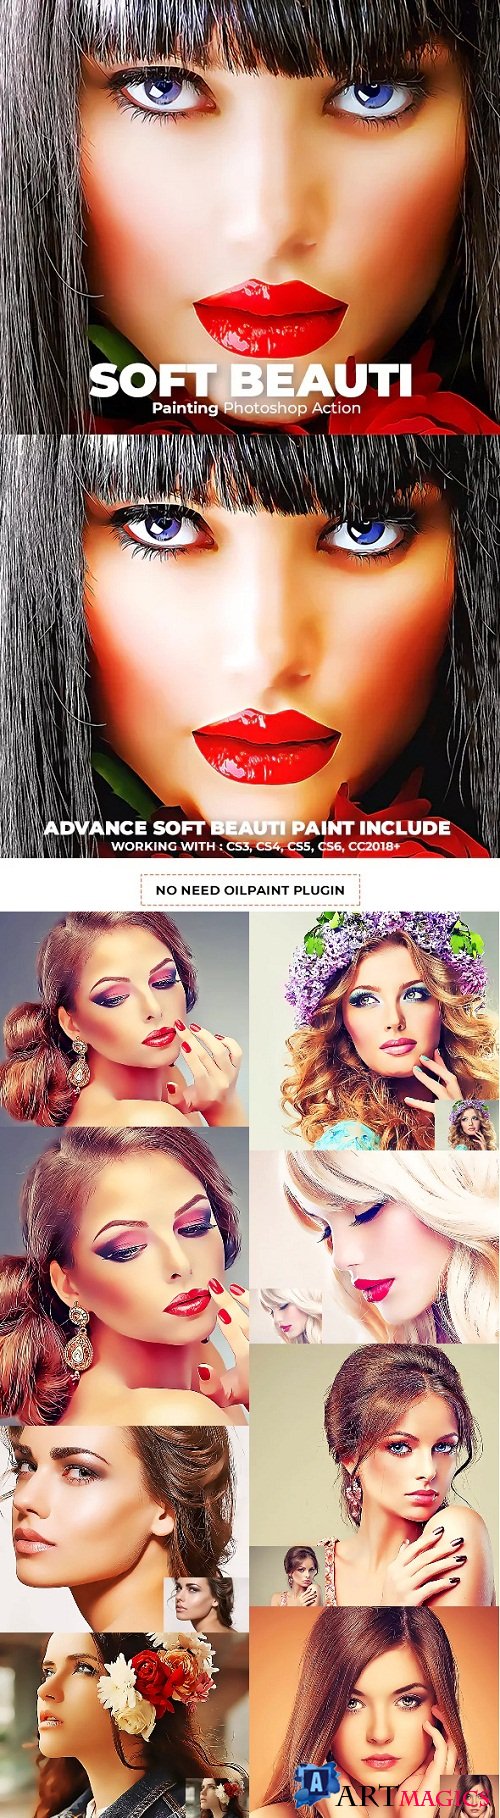 Soft Beauty Painting Photoshop Action 23218455